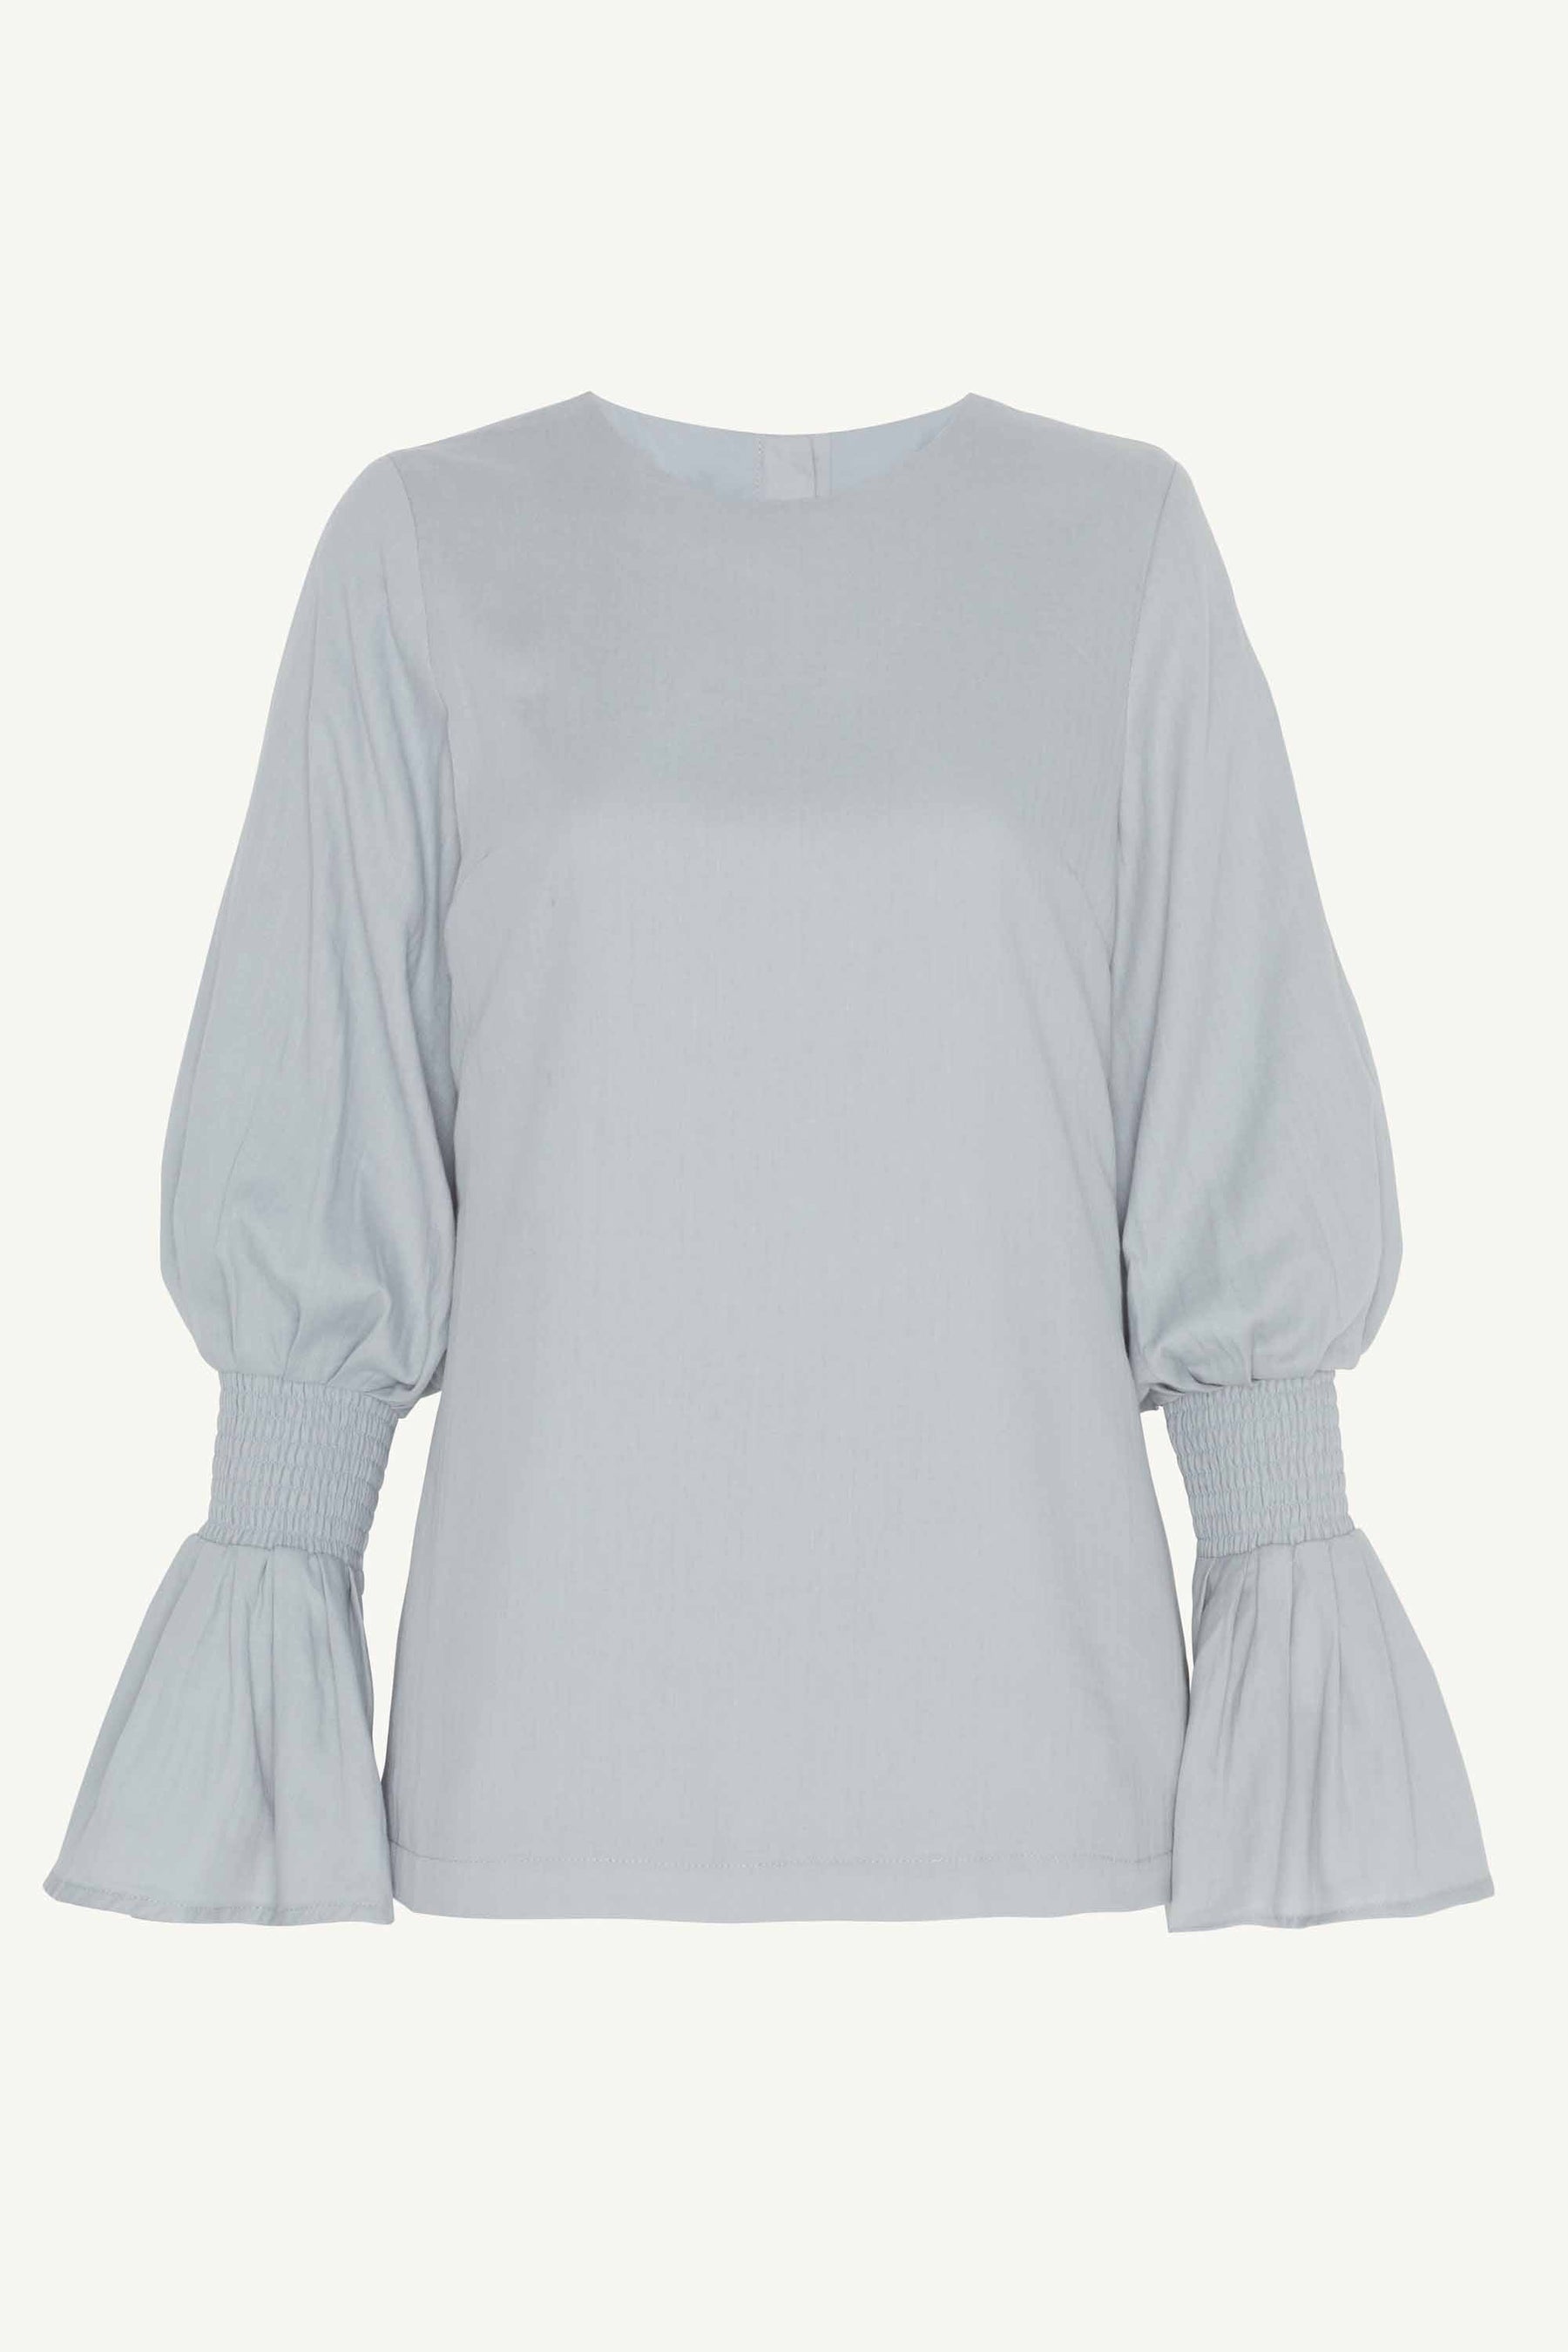 Bea Bell Sleeve Top - Powder Blue Clothing Veiled Collection 